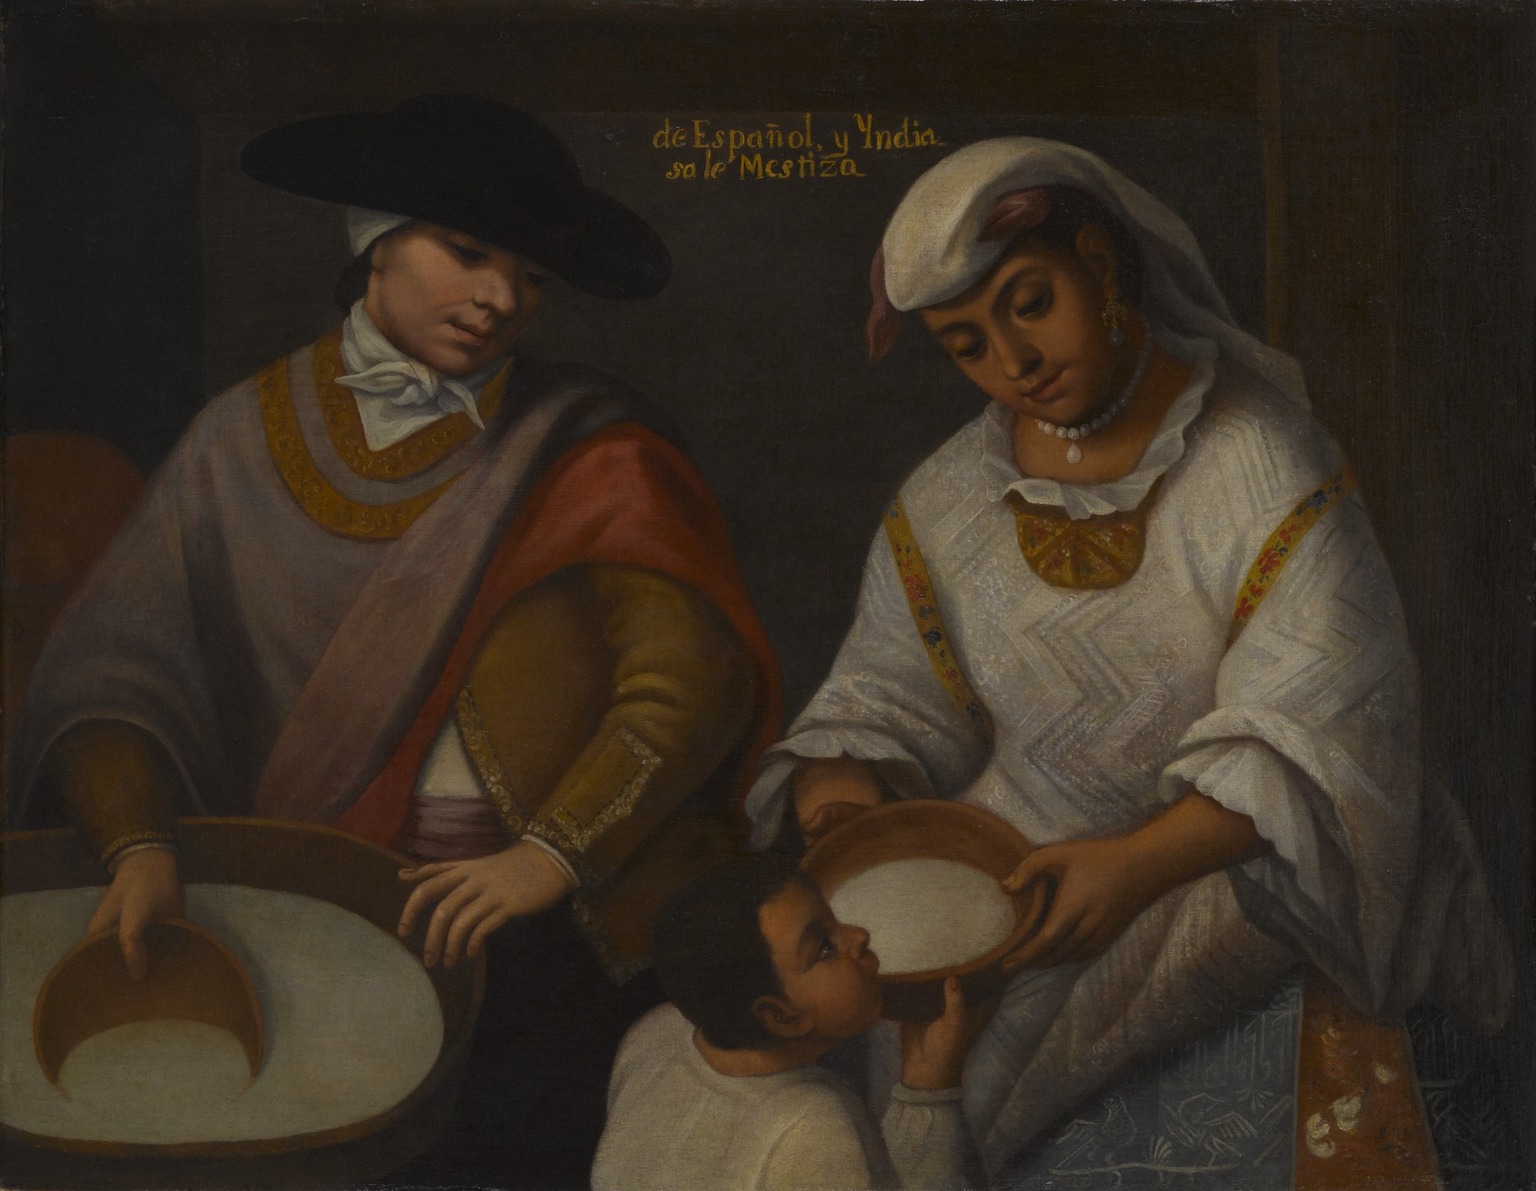 Spaniard and Indian Produce a Mestizo, attributed to Juan